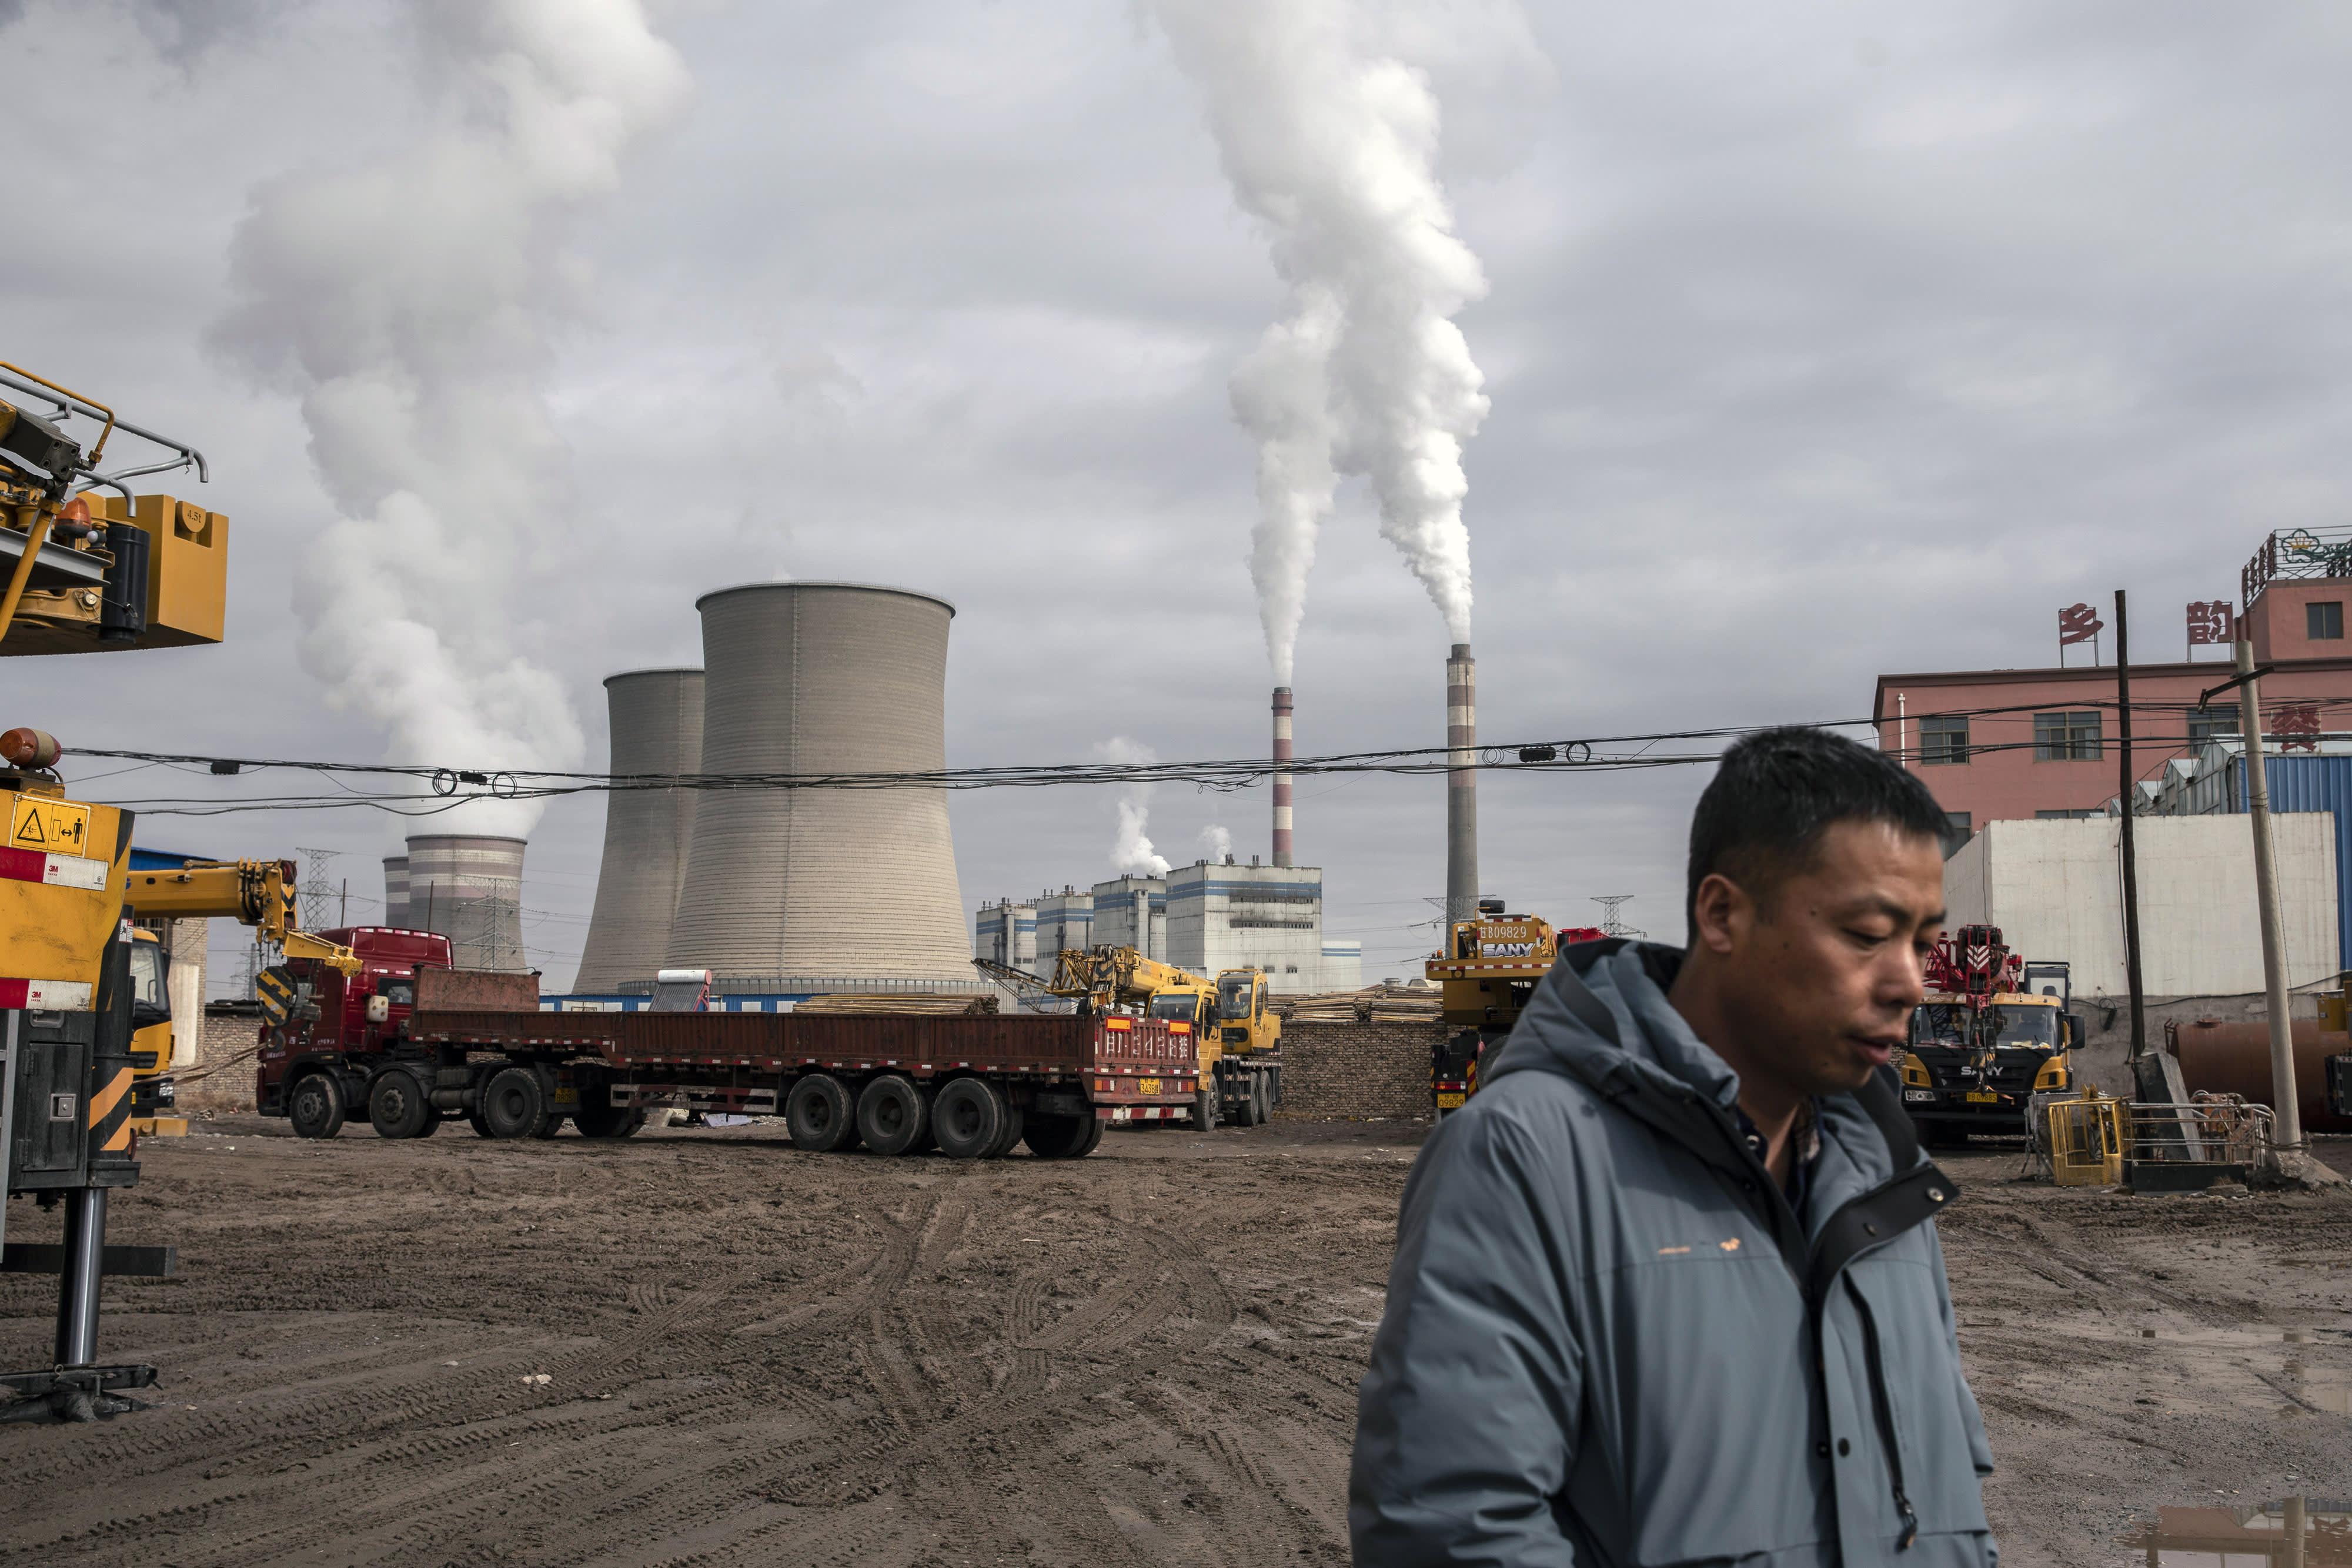 China is facing an energy crisis. Here’s how to play the market, according to Jefferies